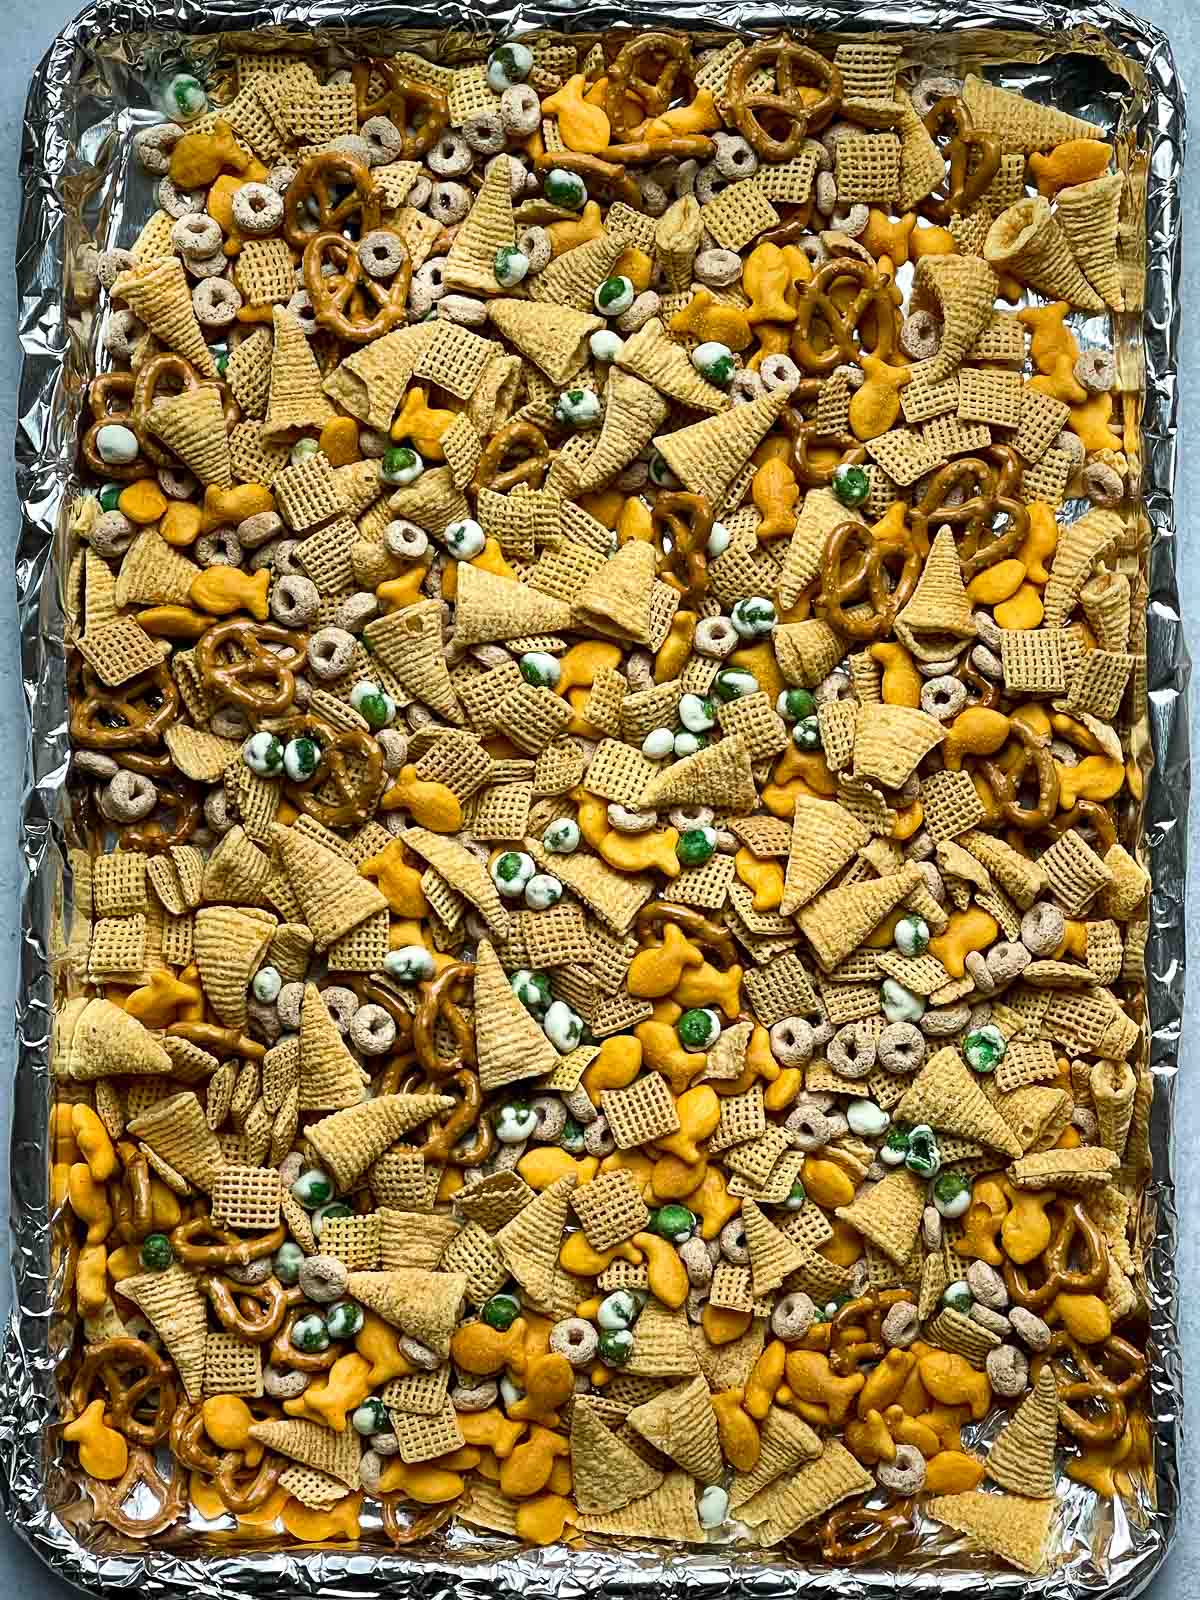 A baking tray lined with Furikake Chex Mix before baking.